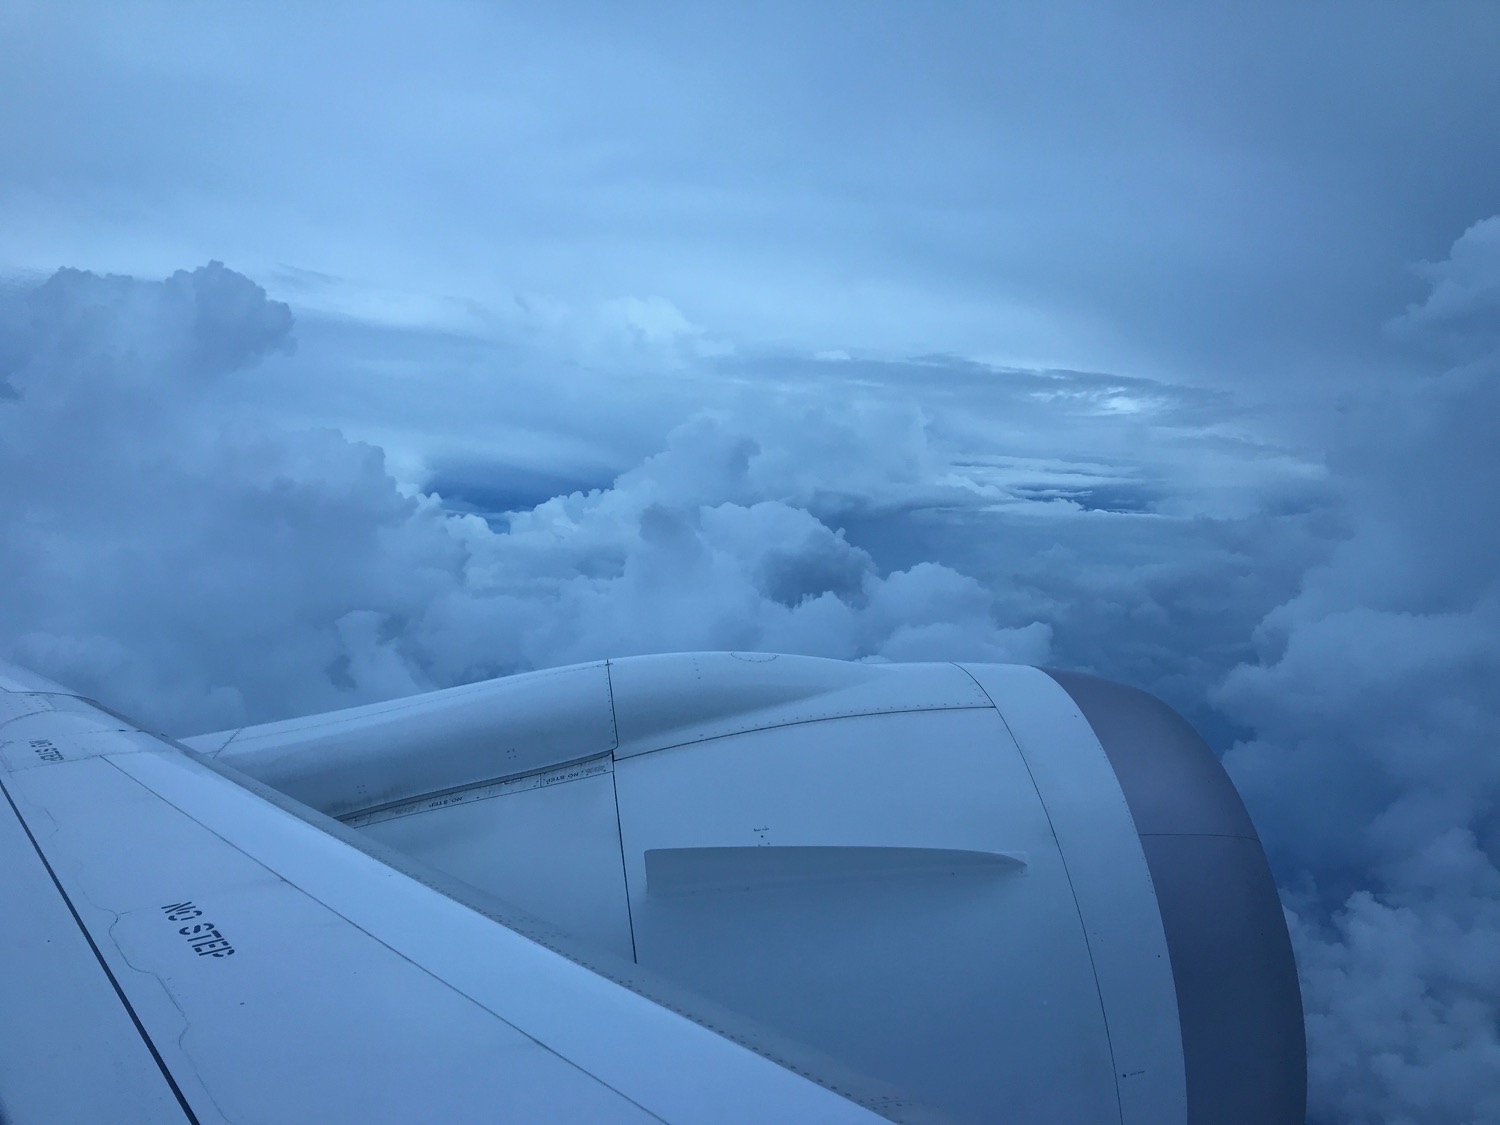 an airplane wing and clouds